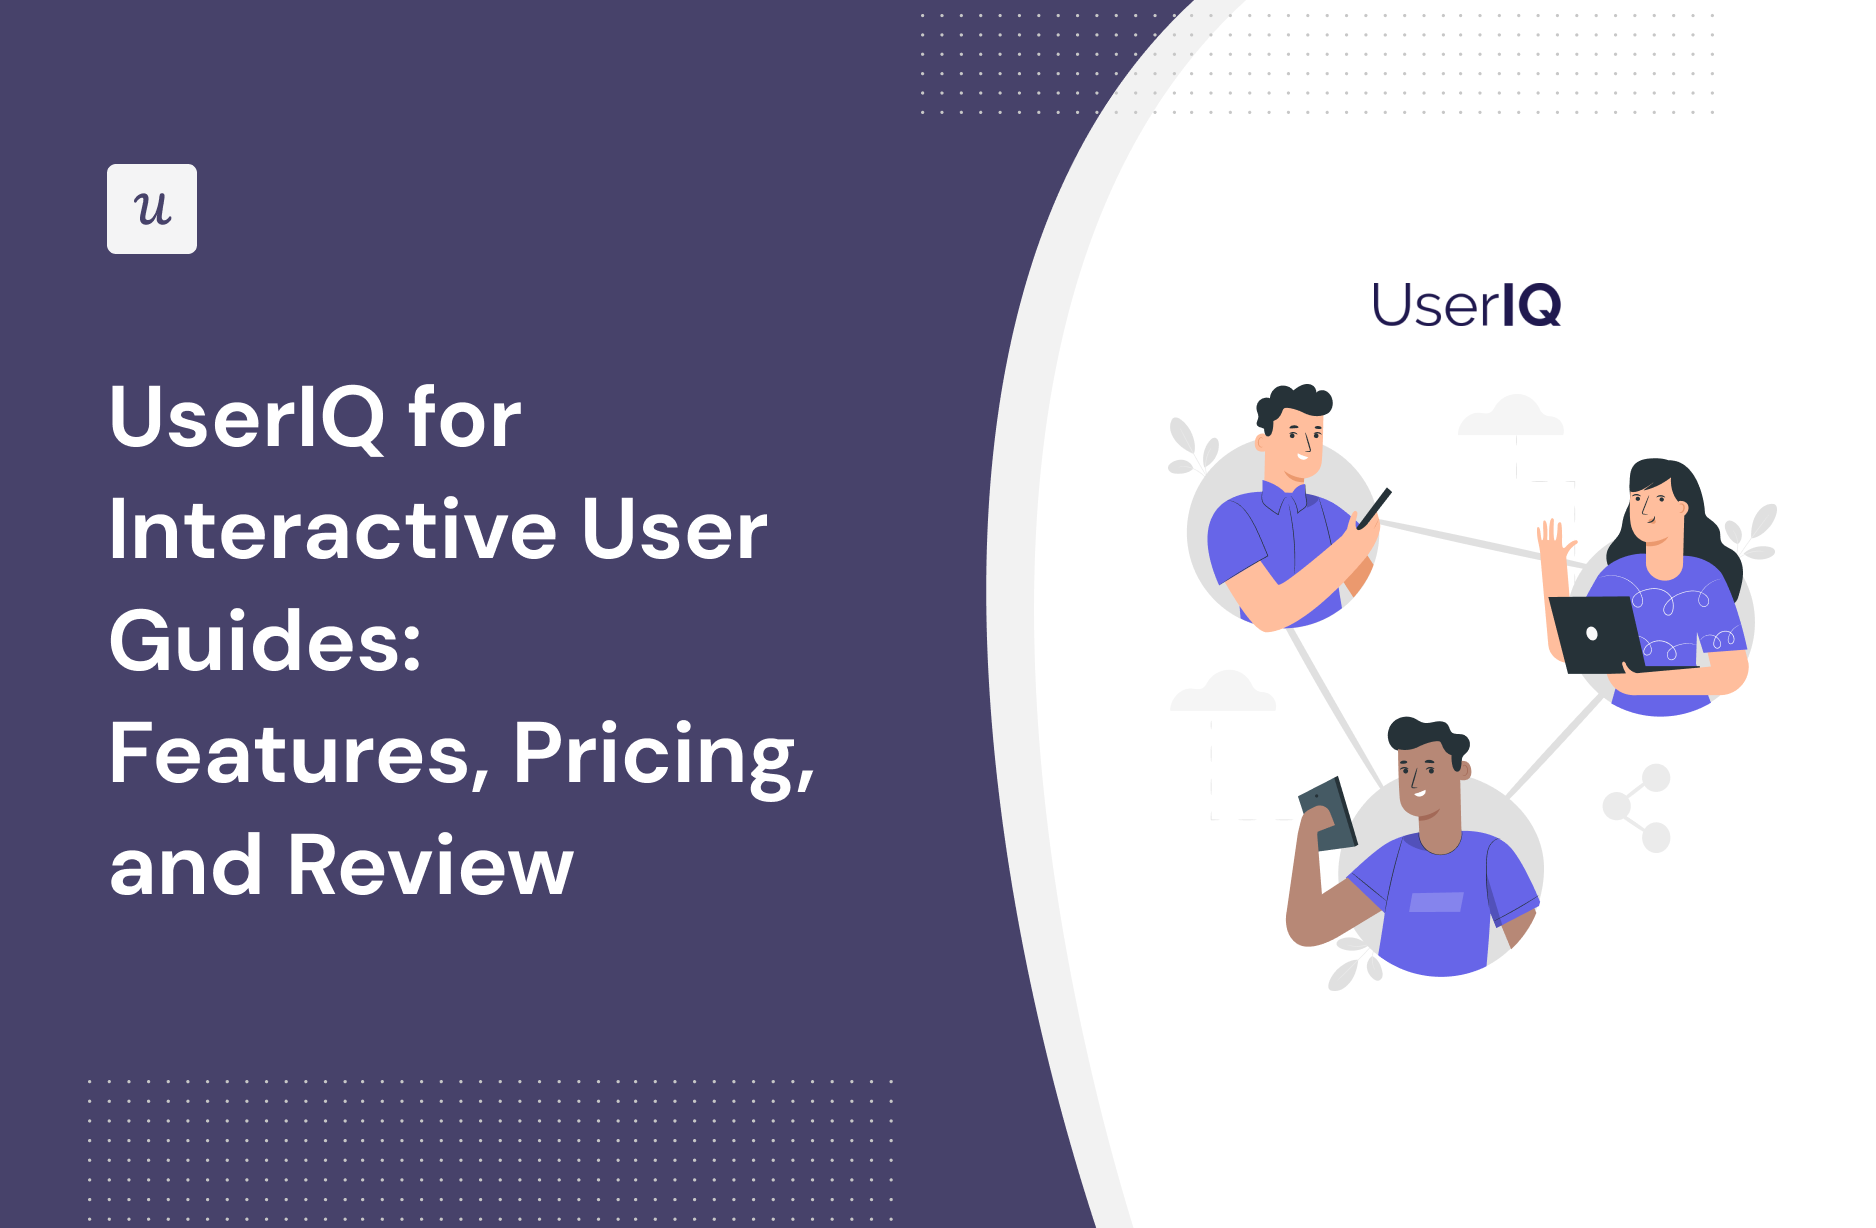 UserIQ for Interactive User Guides: Features, Pricing, and Review